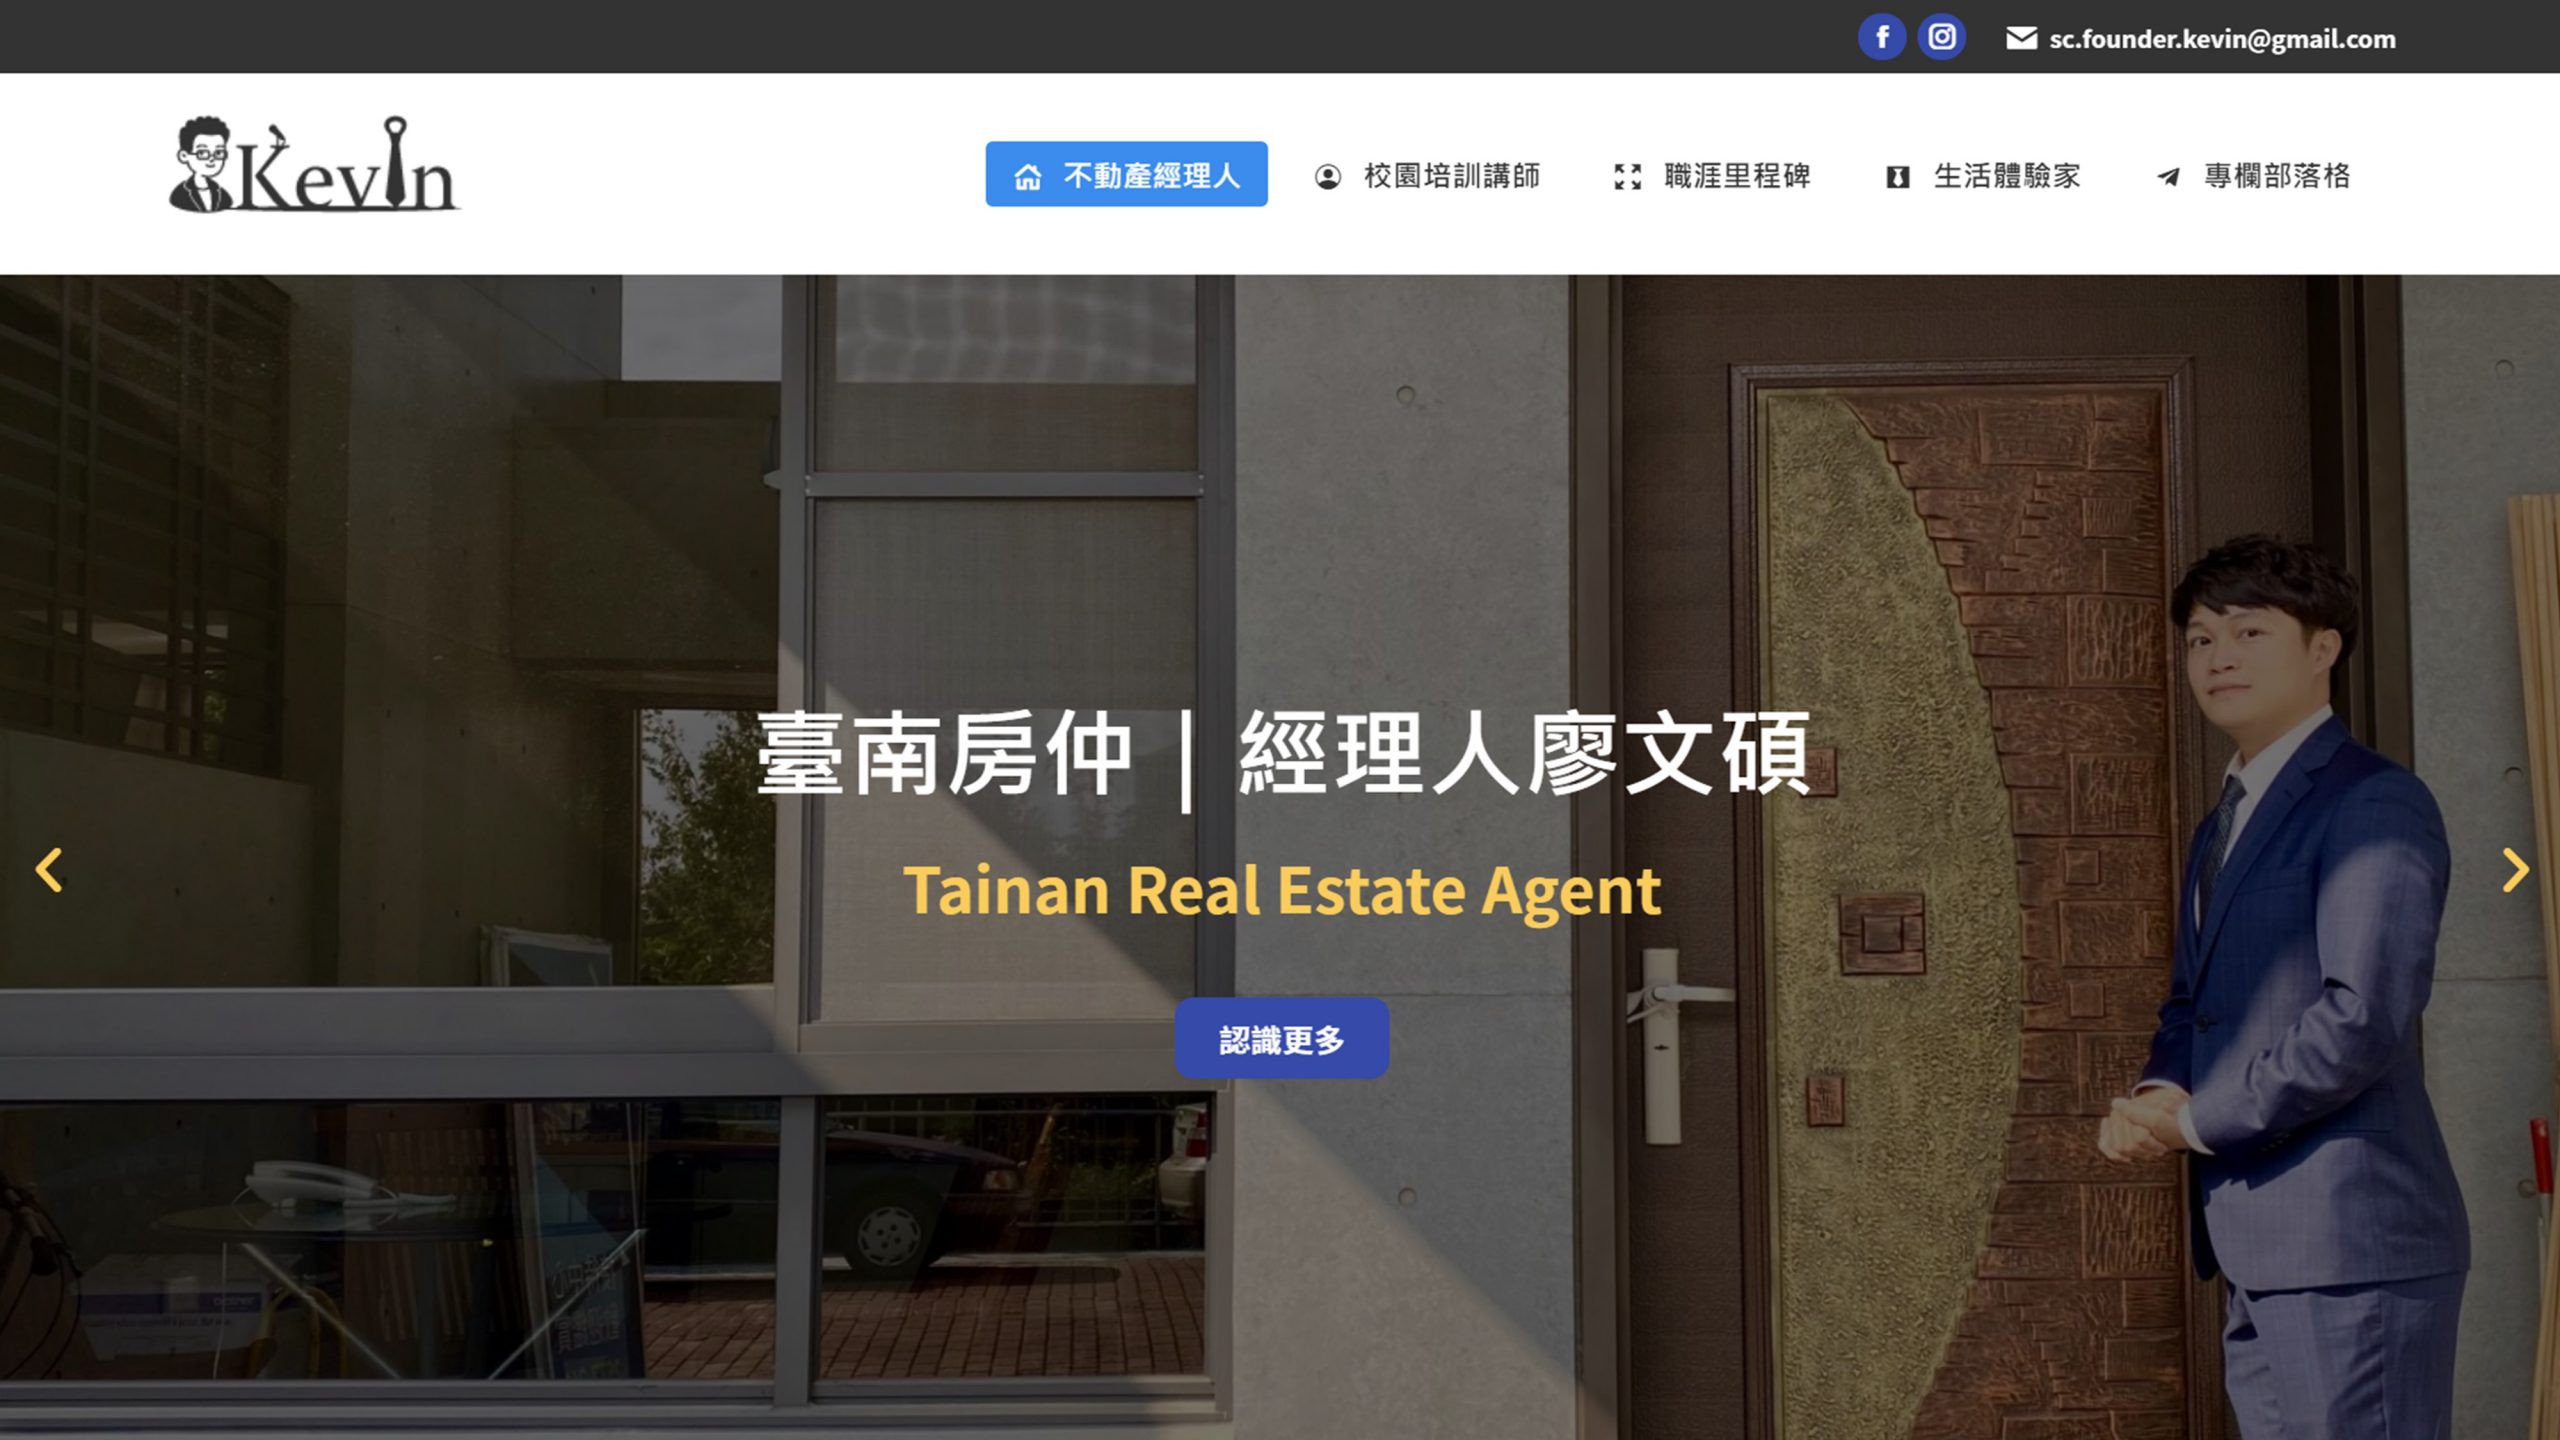 tainan-real-estate-agent-featured-image